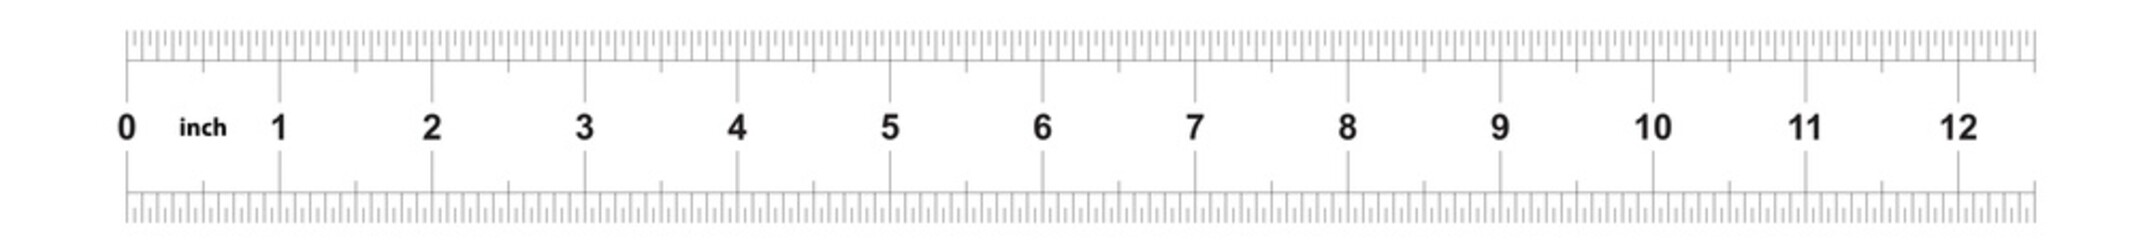 Ruler 12 inches Metric. The division price is 0.05 inch. Ruler double sided. Precise measuring tool. Calibration grid.